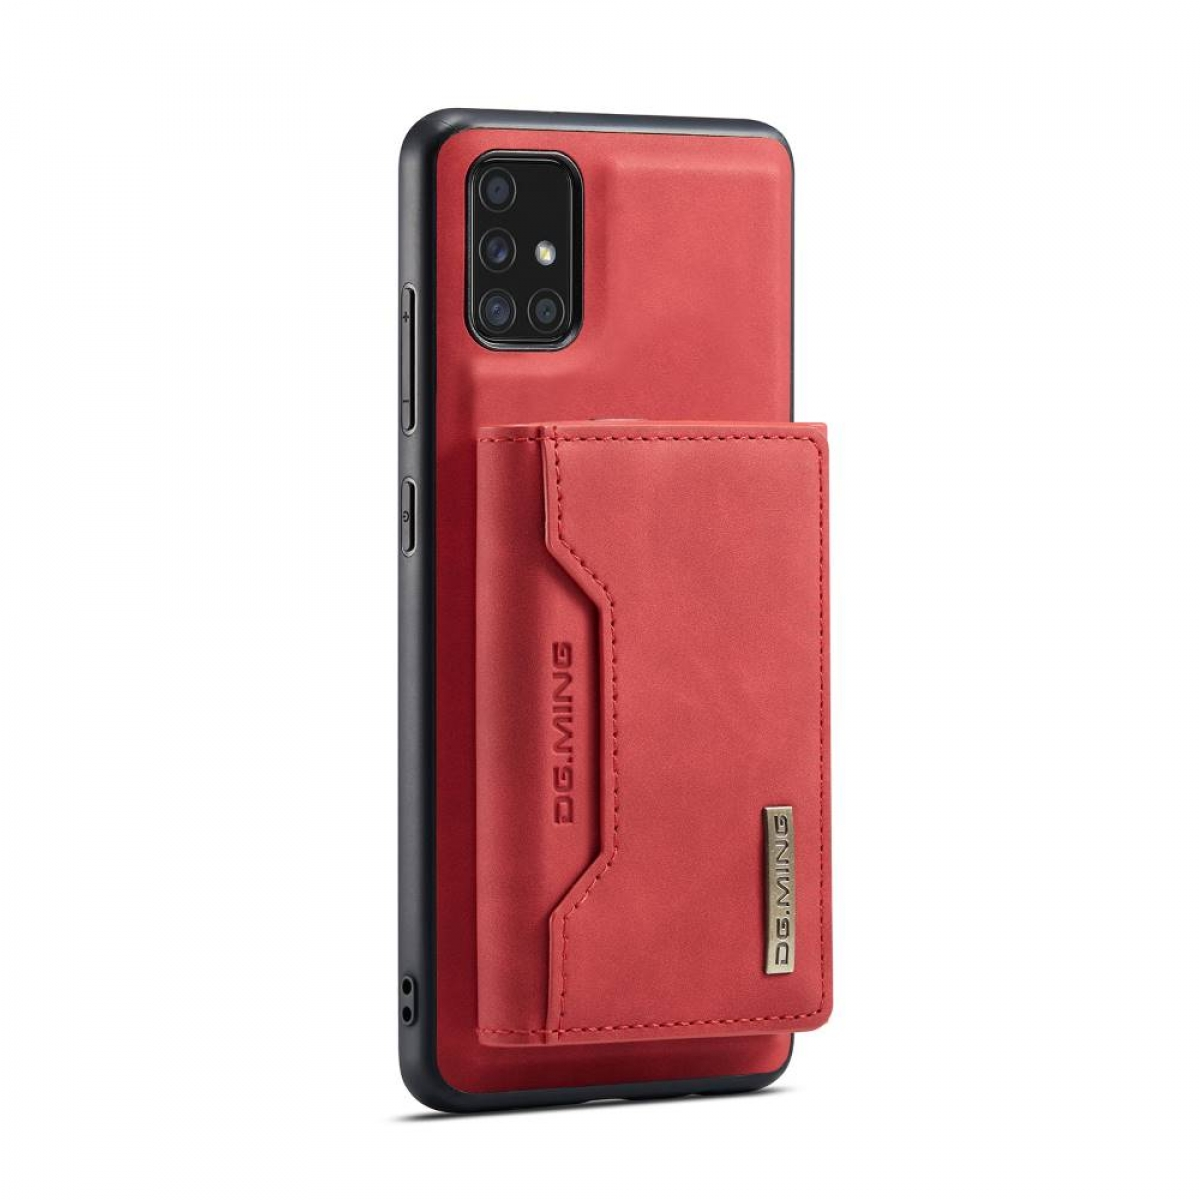 DG MING Galaxy A51, Backcover, 2in1, Samsung, M2 Rot